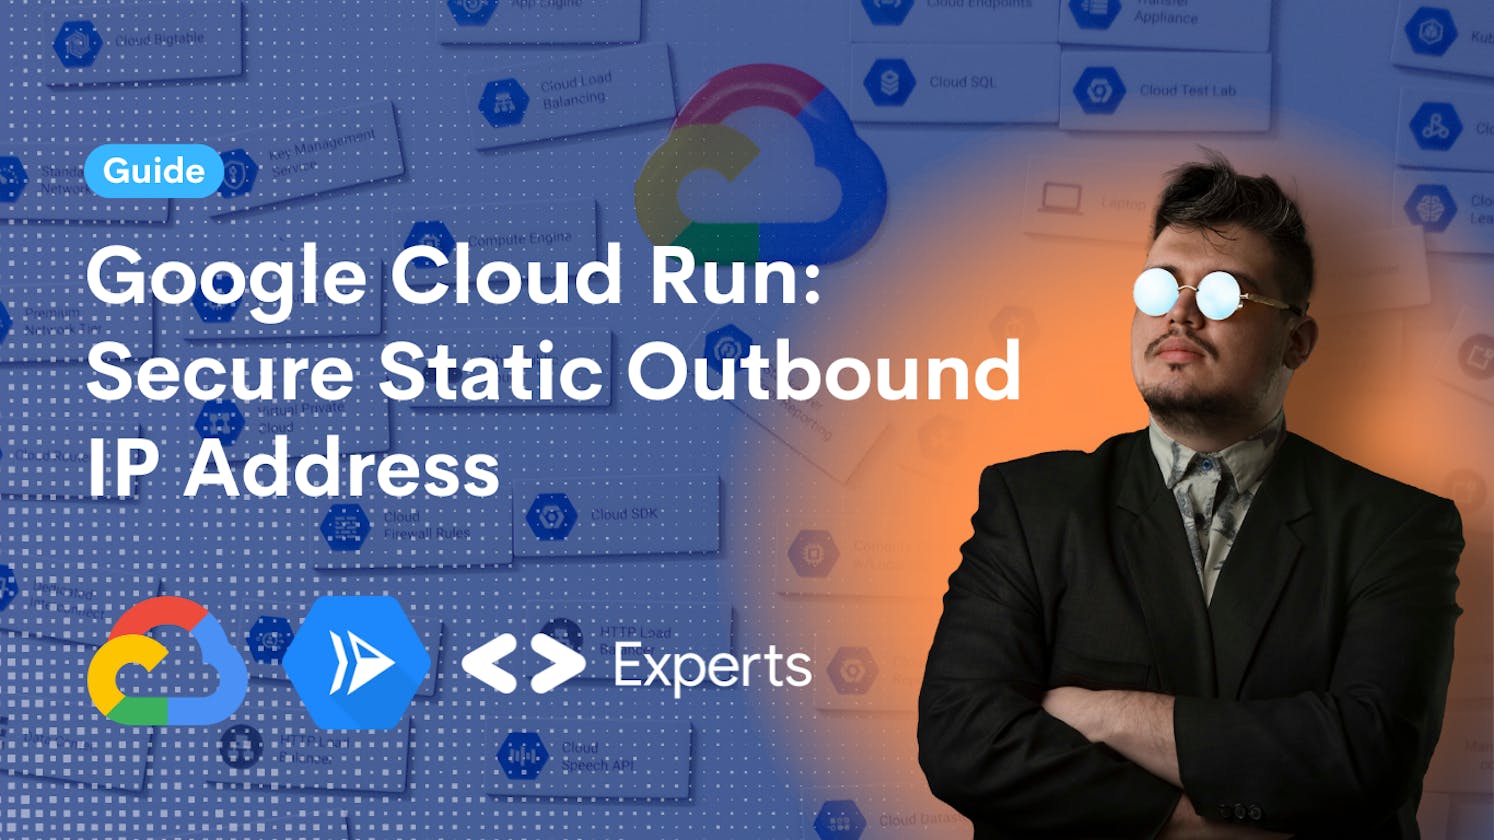 Google Cloud Run - Secure Static Outbound IP Address